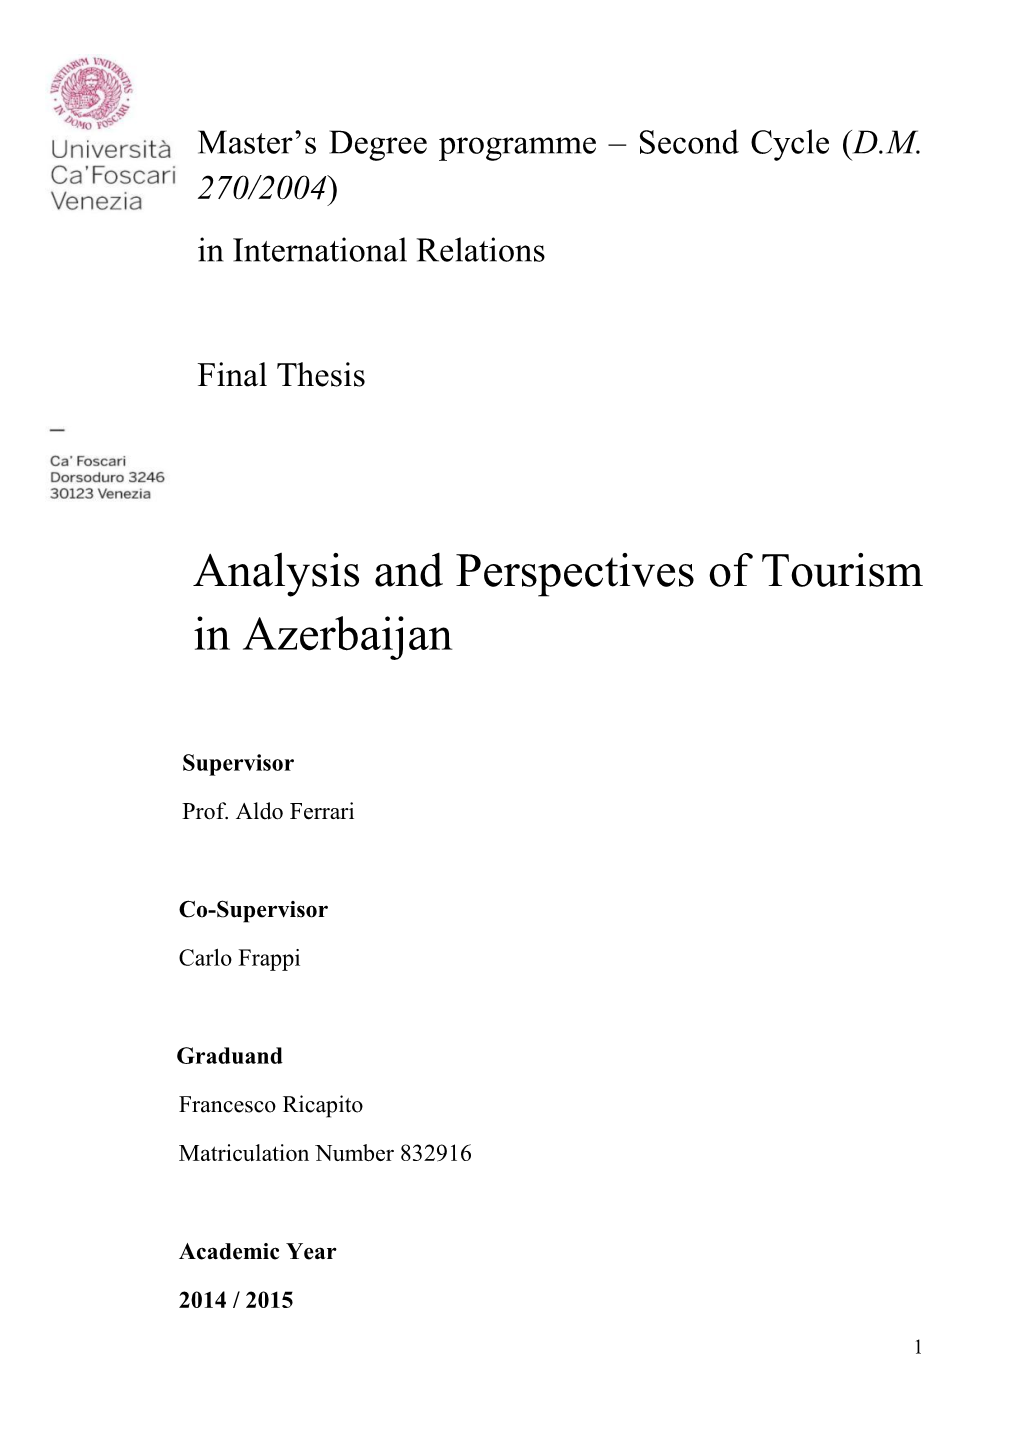 Analysis and Perspectives of Tourism in Azerbaijan